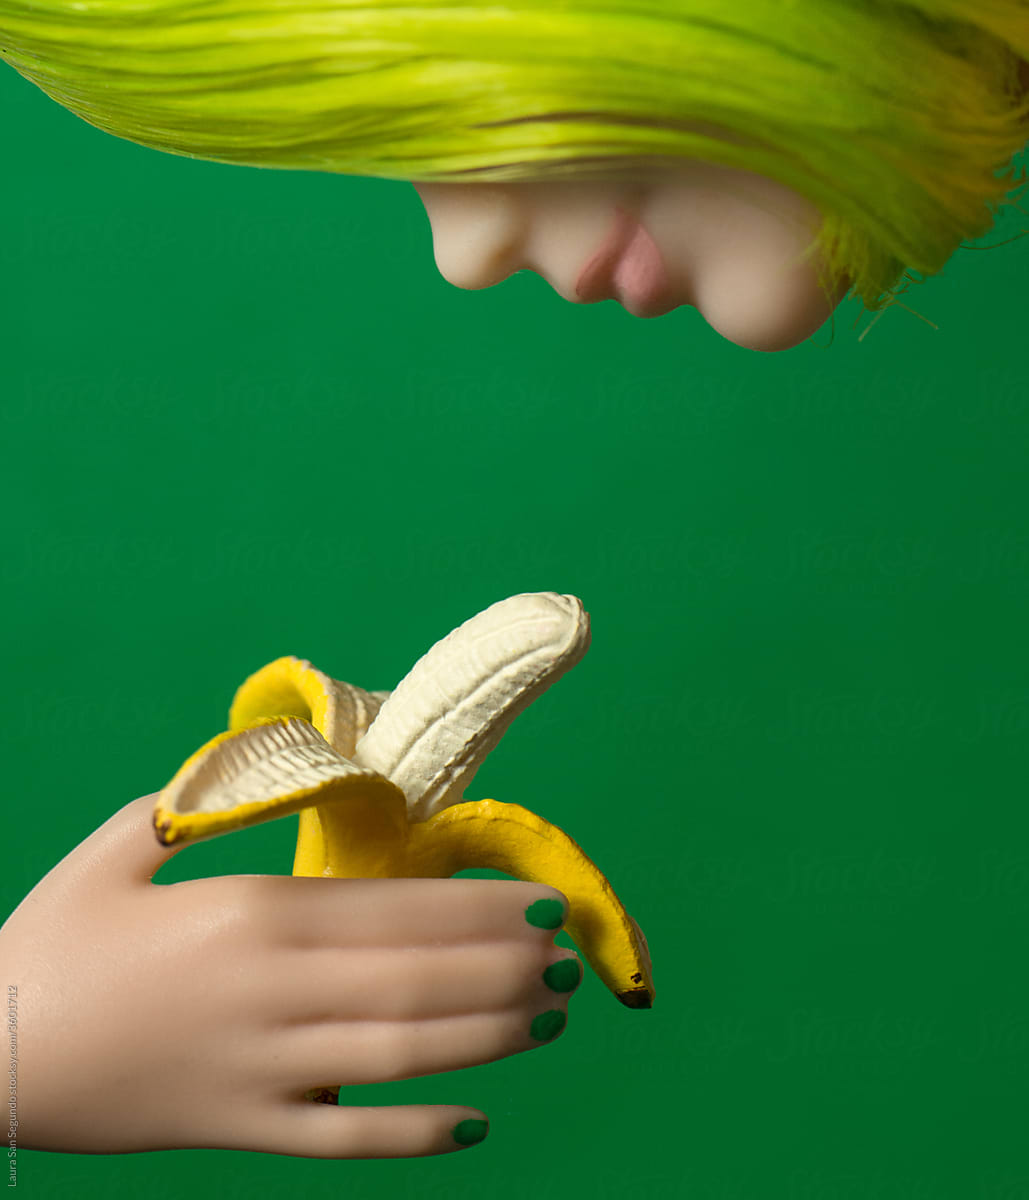 Plastic hand with green nails holding an open banana in front of a green haired doll.